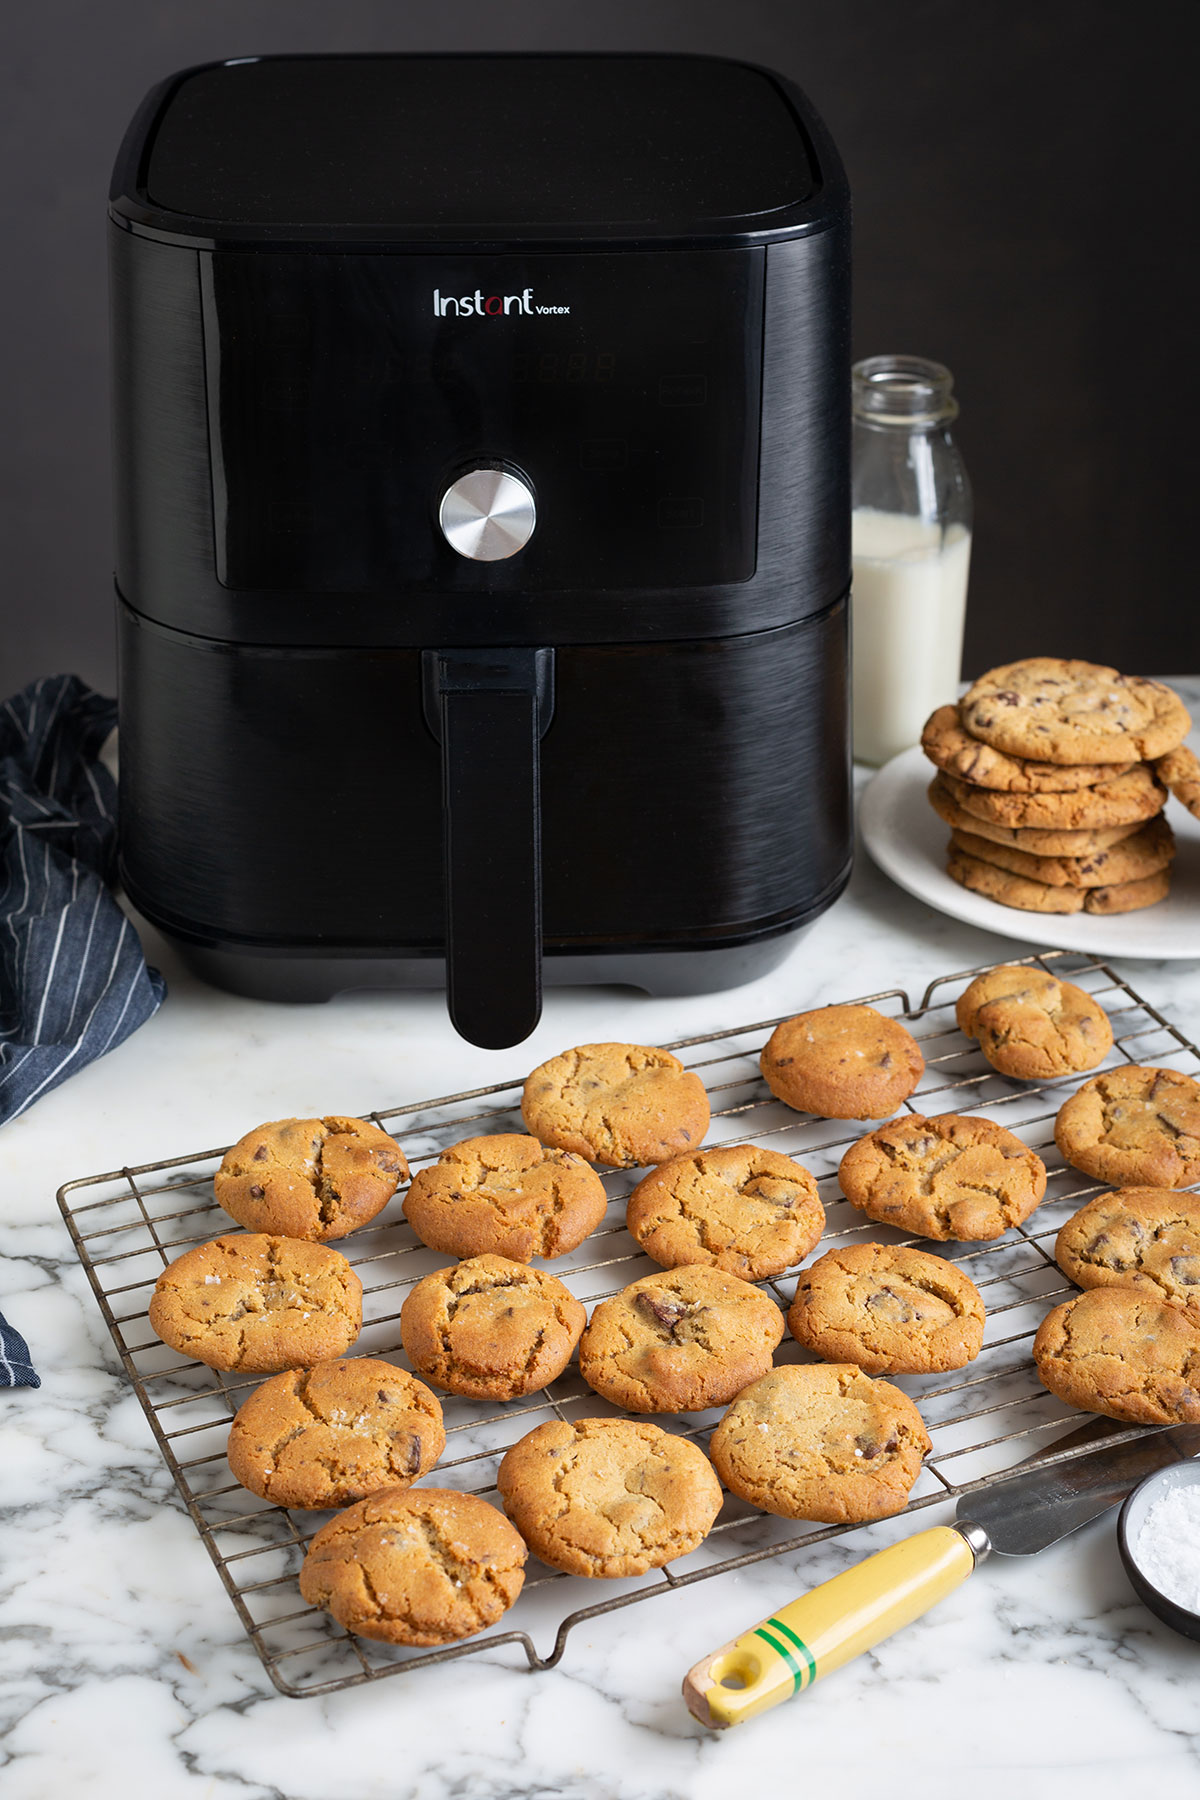 How to make chocolate chip cookies in an air fryer